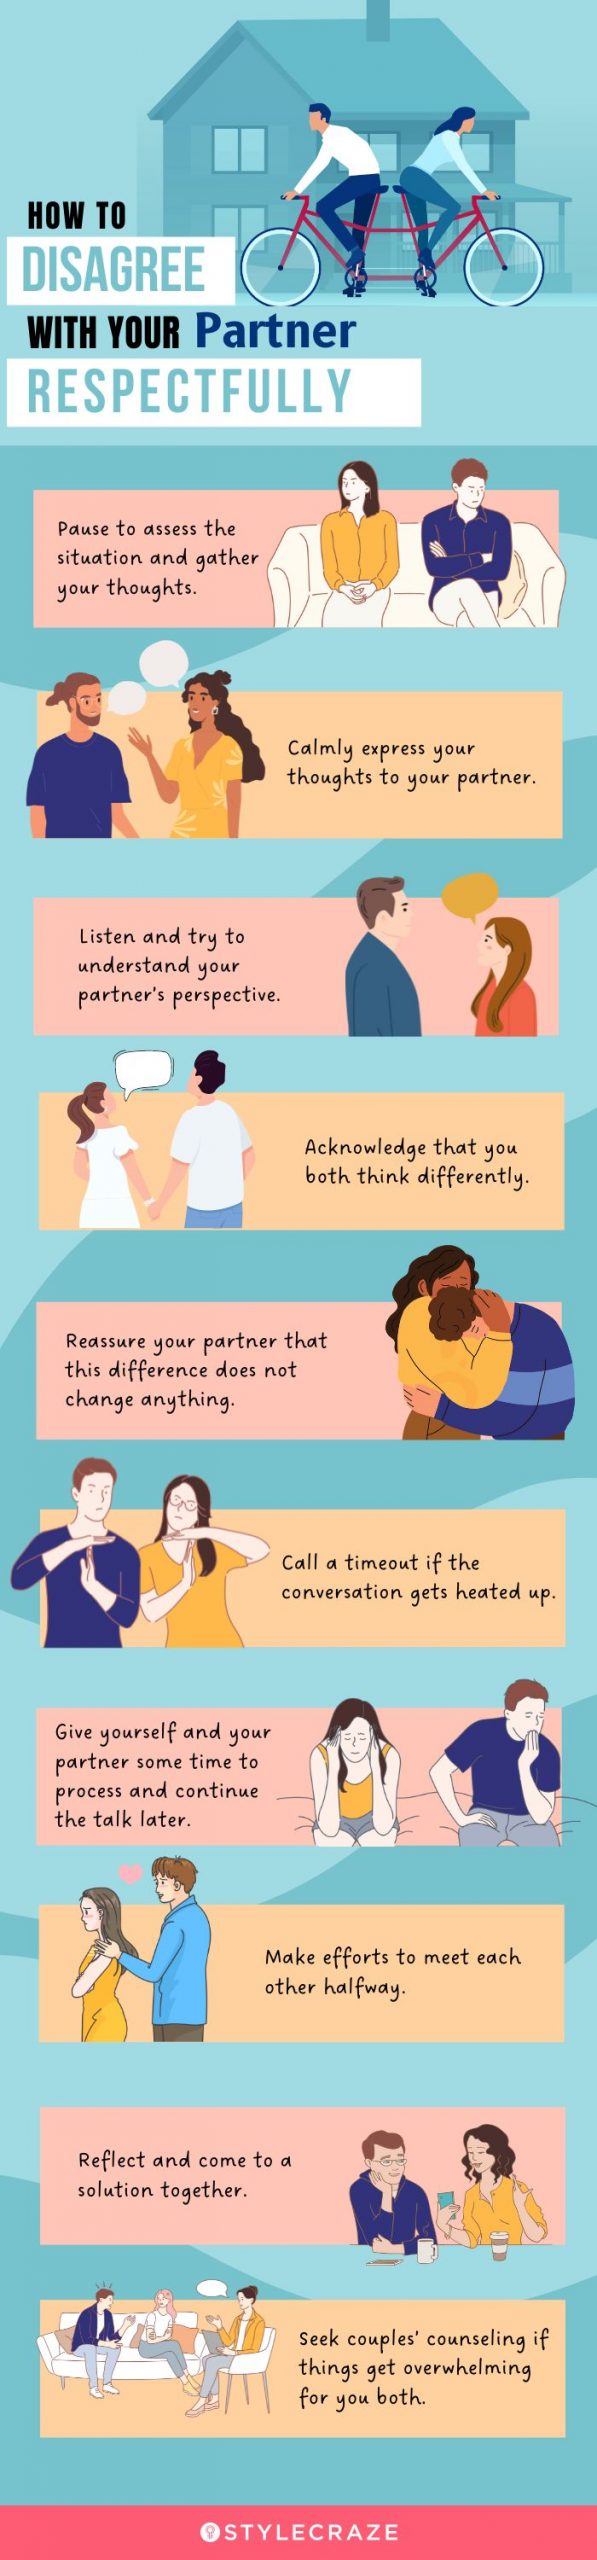 how to disagree with your partner respectfully [infographic]